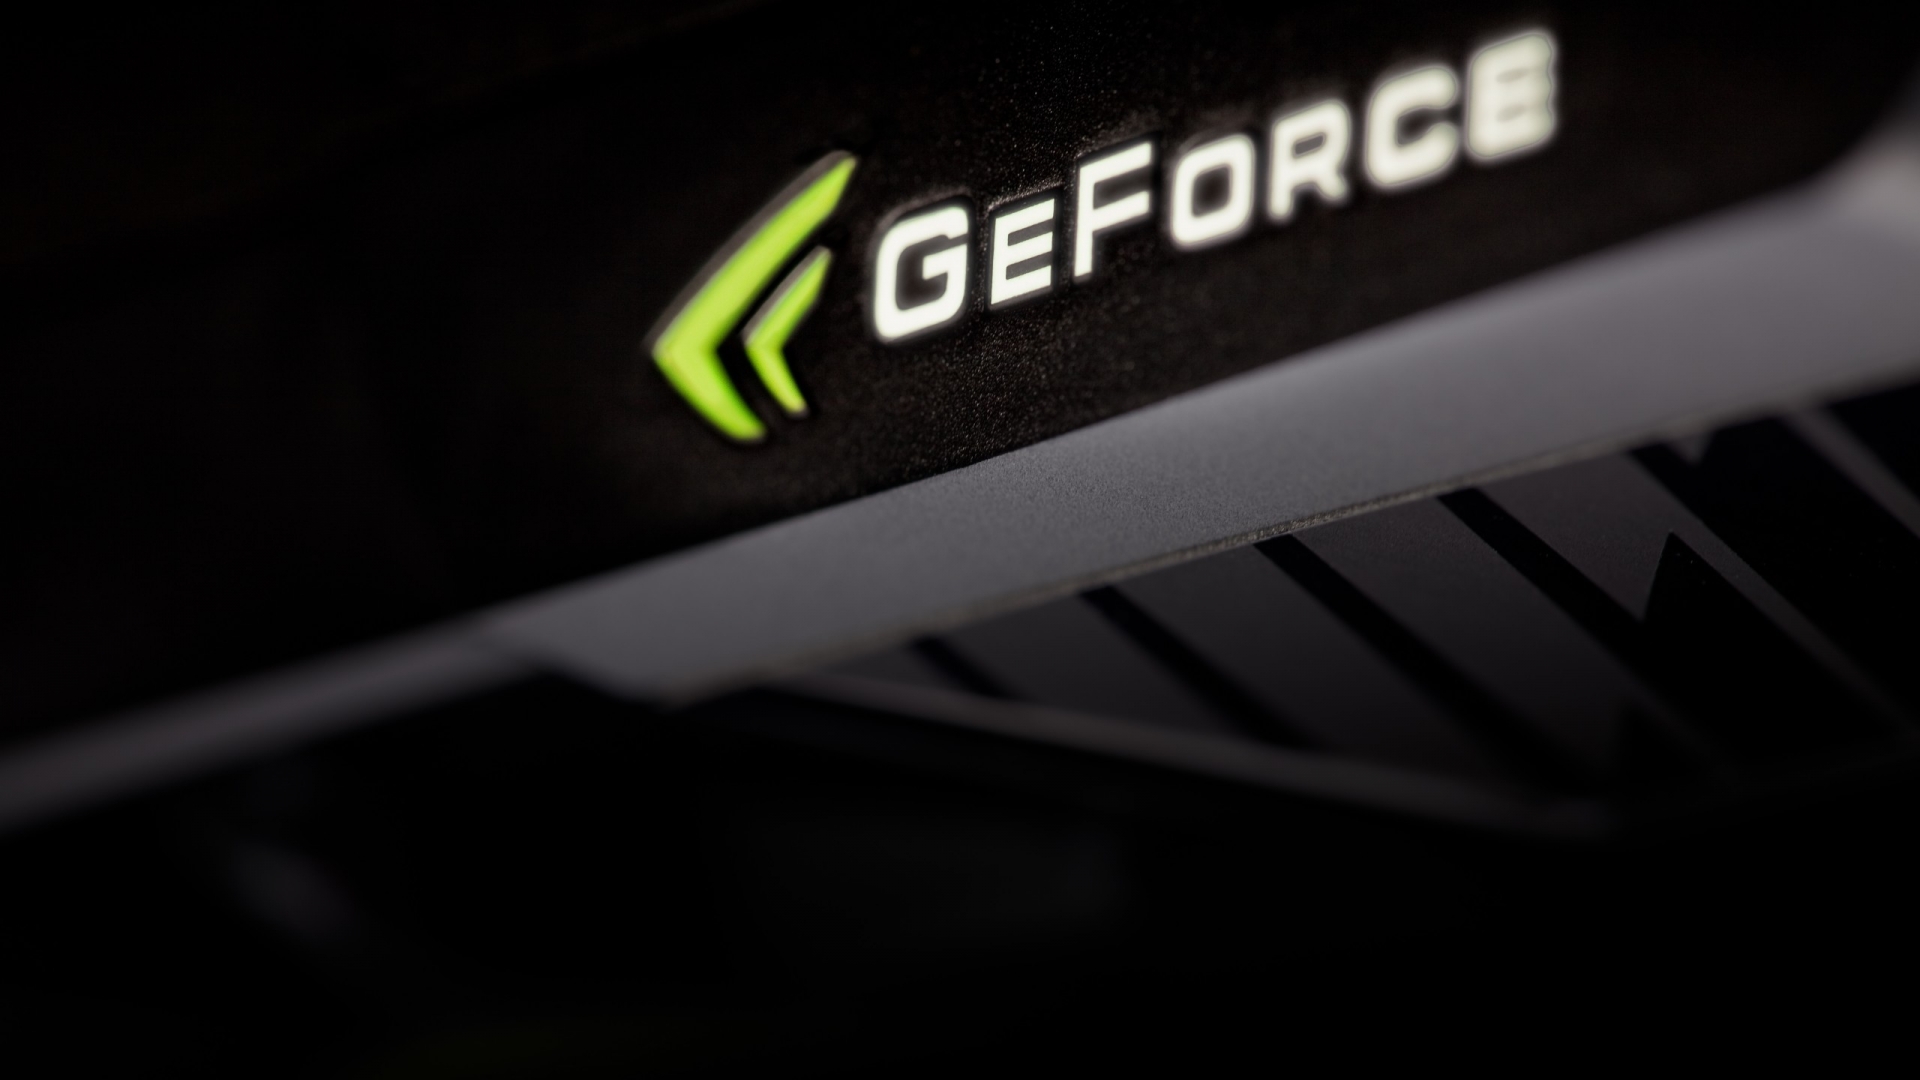 GeForce Graphics for 1920 x 1080 HDTV 1080p resolution